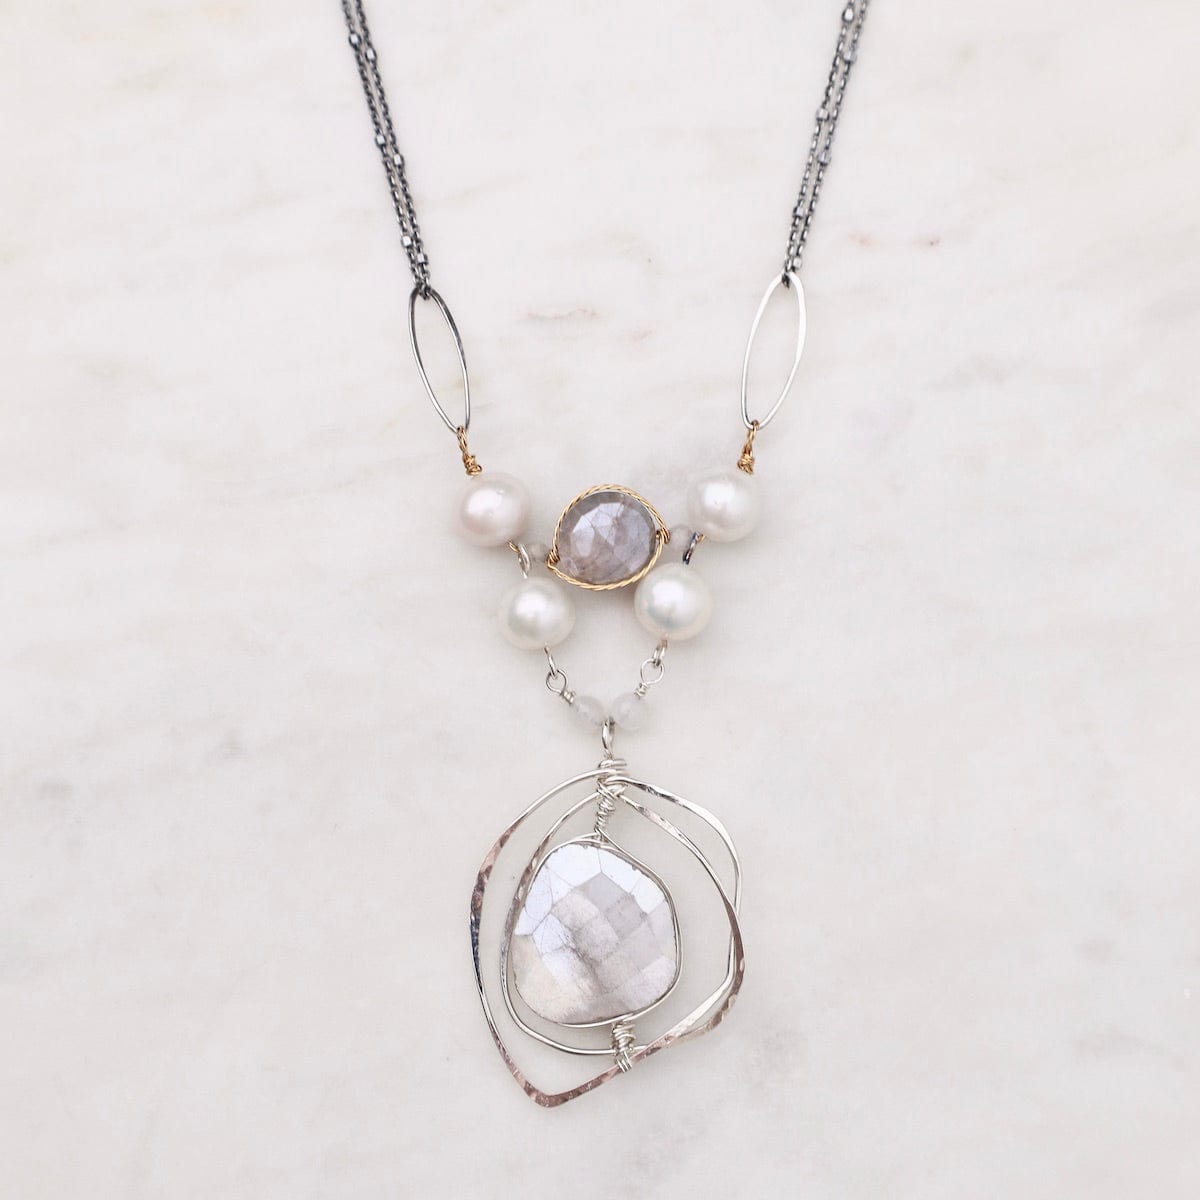 NKL Freshwater Pearl and Grey Moonstone Woven Necklace